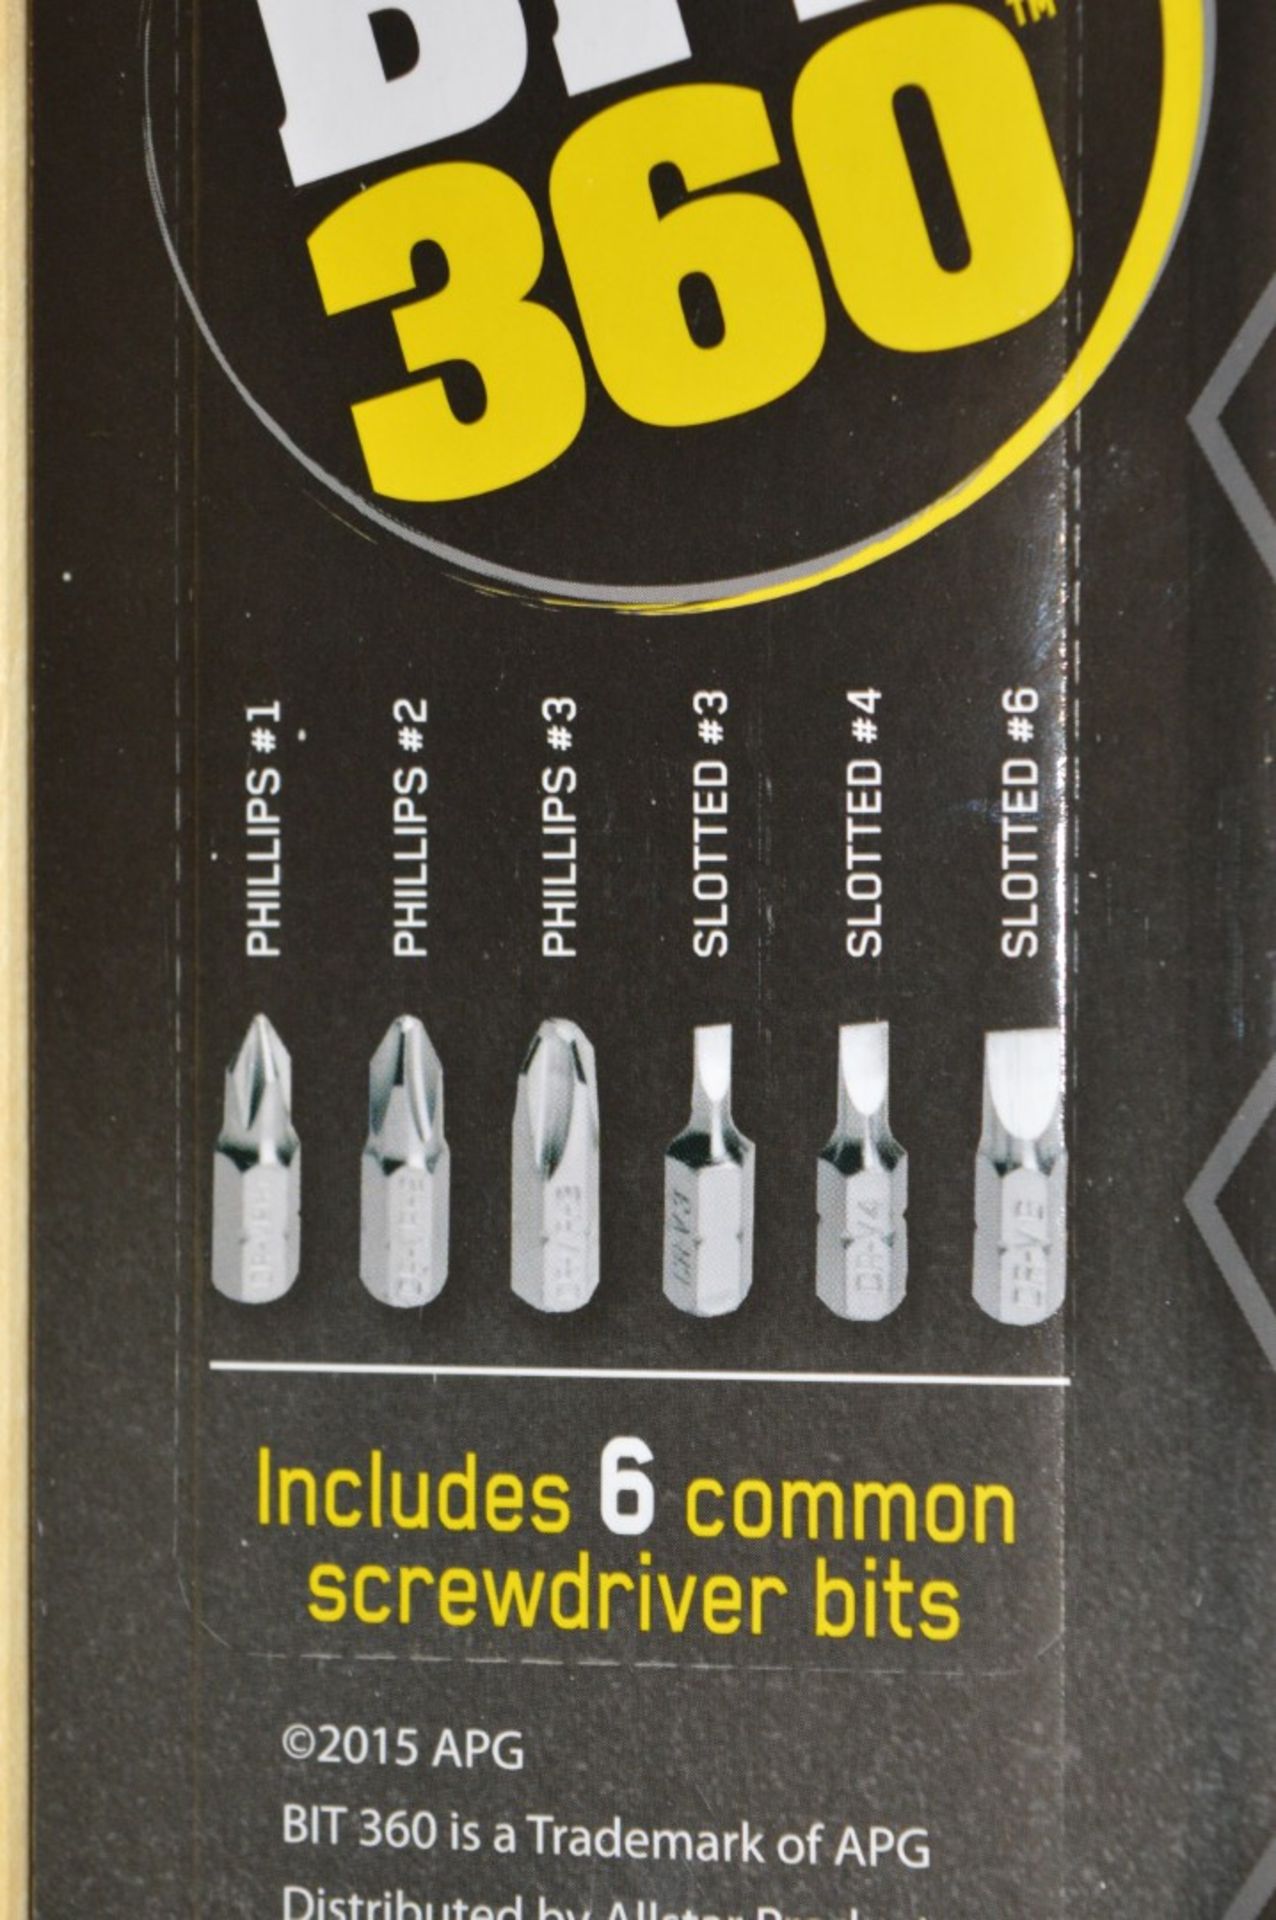 5 x Bit 360 All-in-One Screwdriver and Bit Set - The Screwdrive That Changes Bits Quickly and Easily - Image 3 of 7